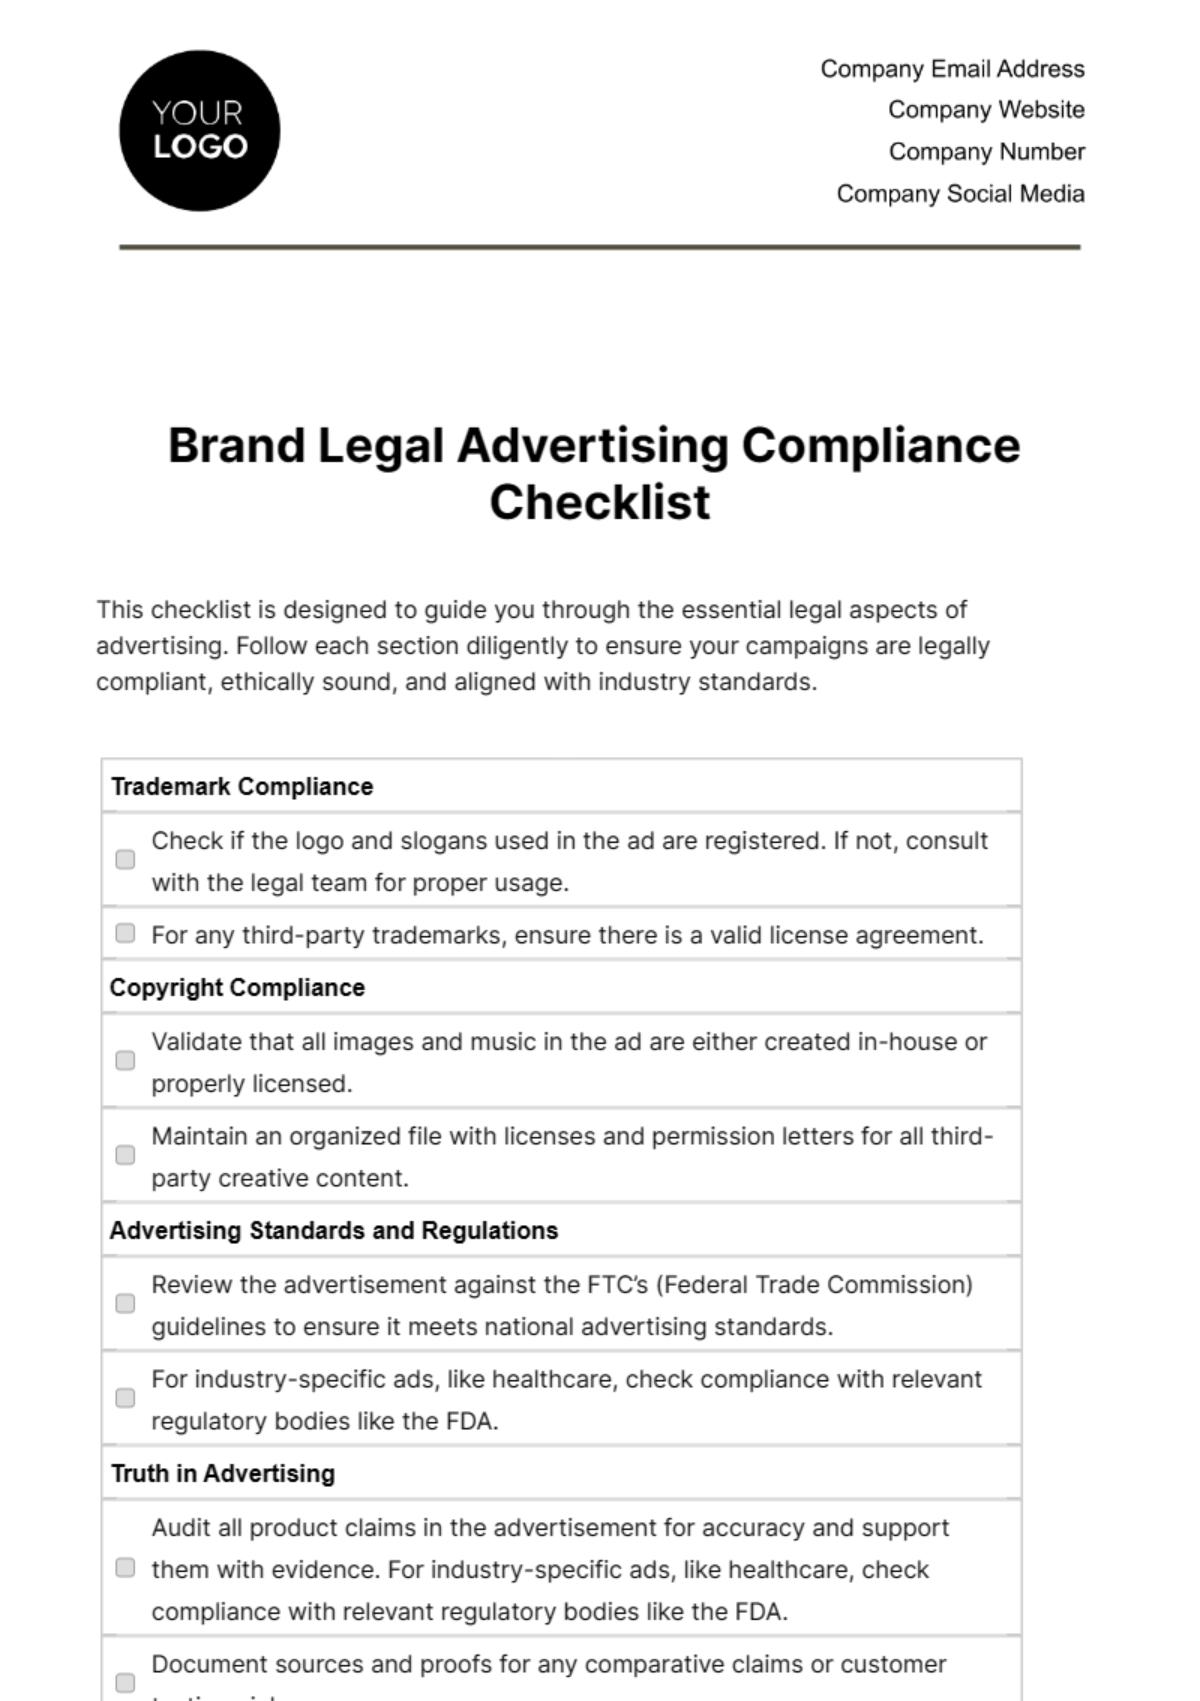 Brand Legal Advertising Compliance Checklist Template